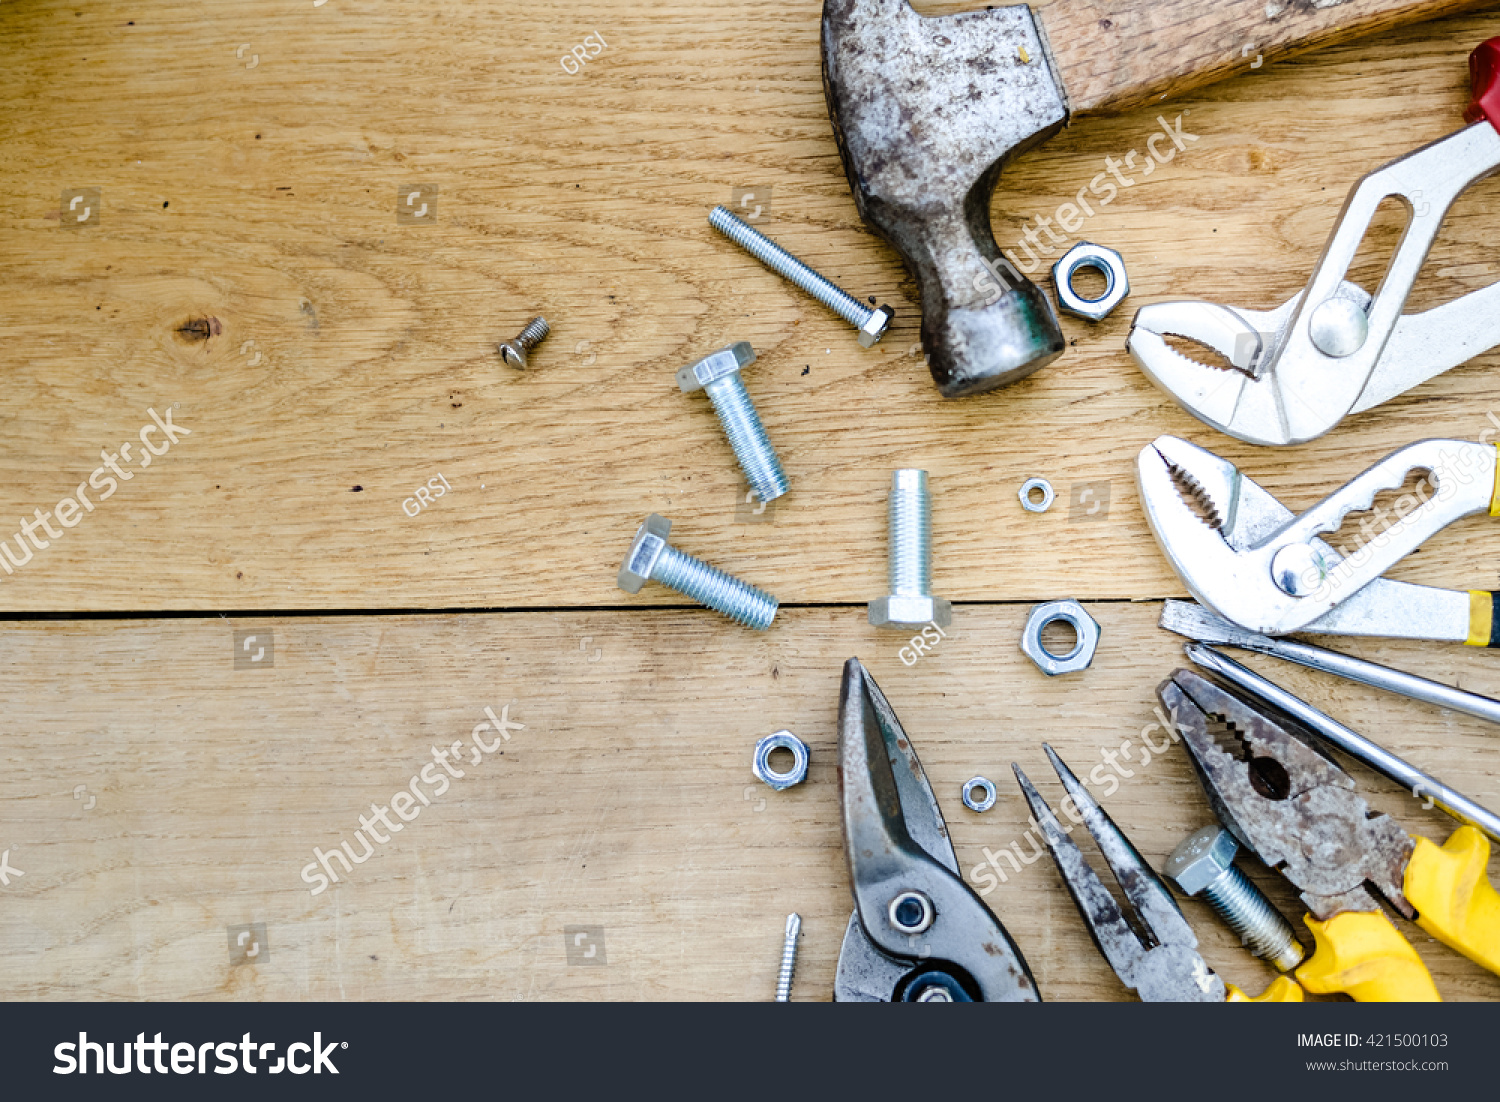 Closeup flat lay of tools on a wooden surface texture, top view #421500103